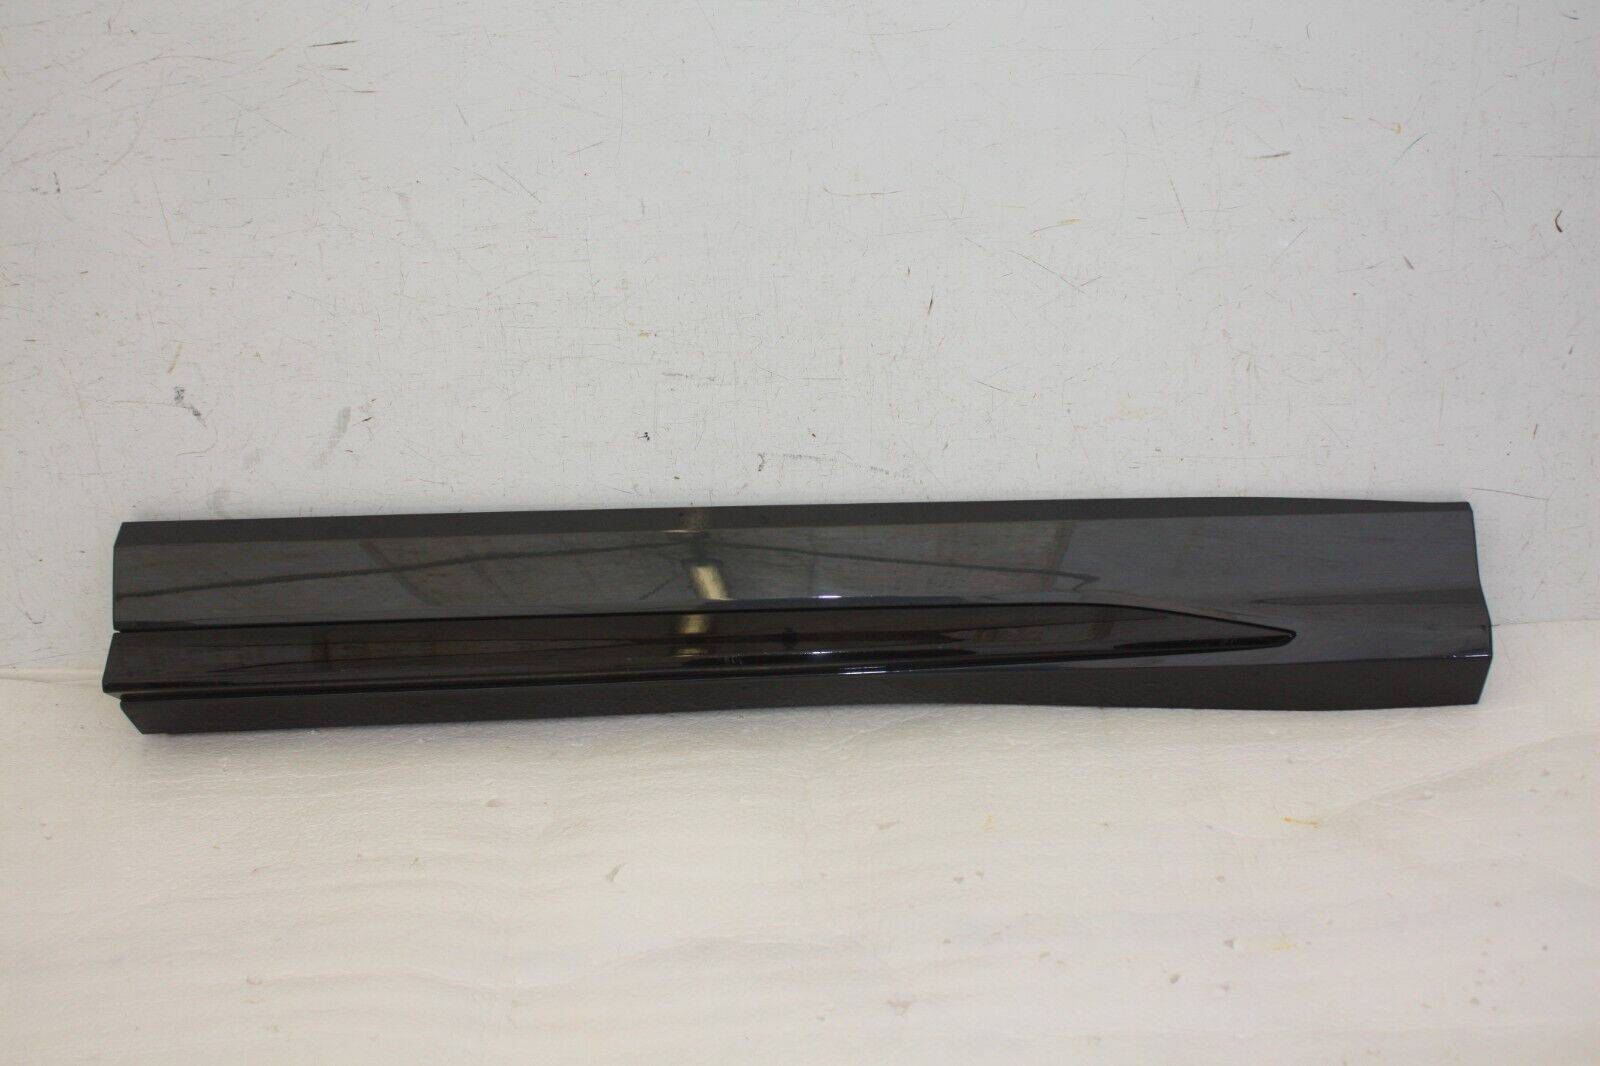 Audi Q3 Front Right Side Door Moulding 2018 ON 83A853960A Genuine DAMAGED 176383102674